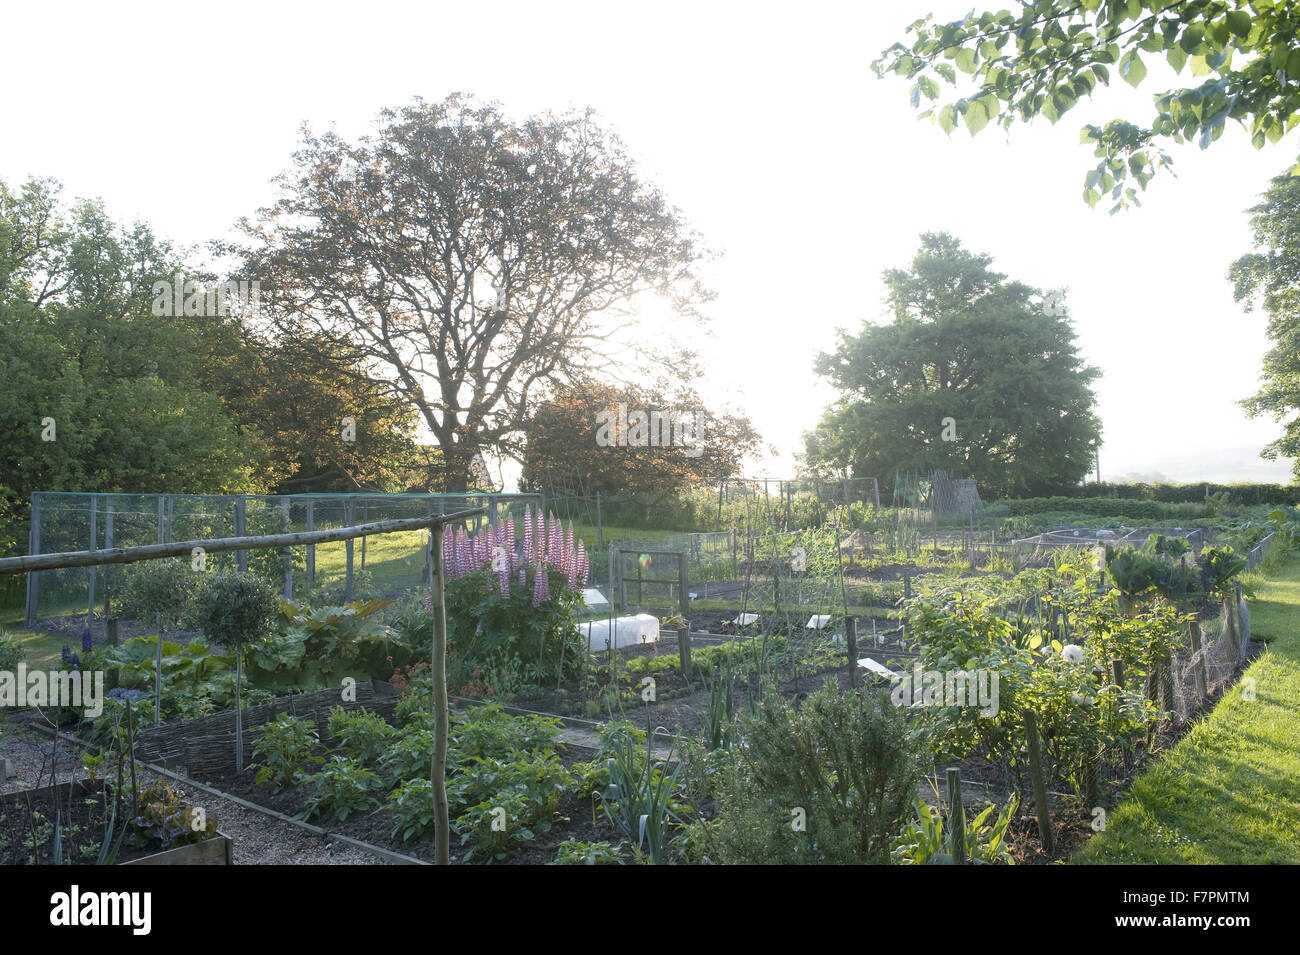 The vegetable garden at Monk's House, East Sussex. Monk's House was the writer Virginia Woolf's country home and retreat. Stock Photo